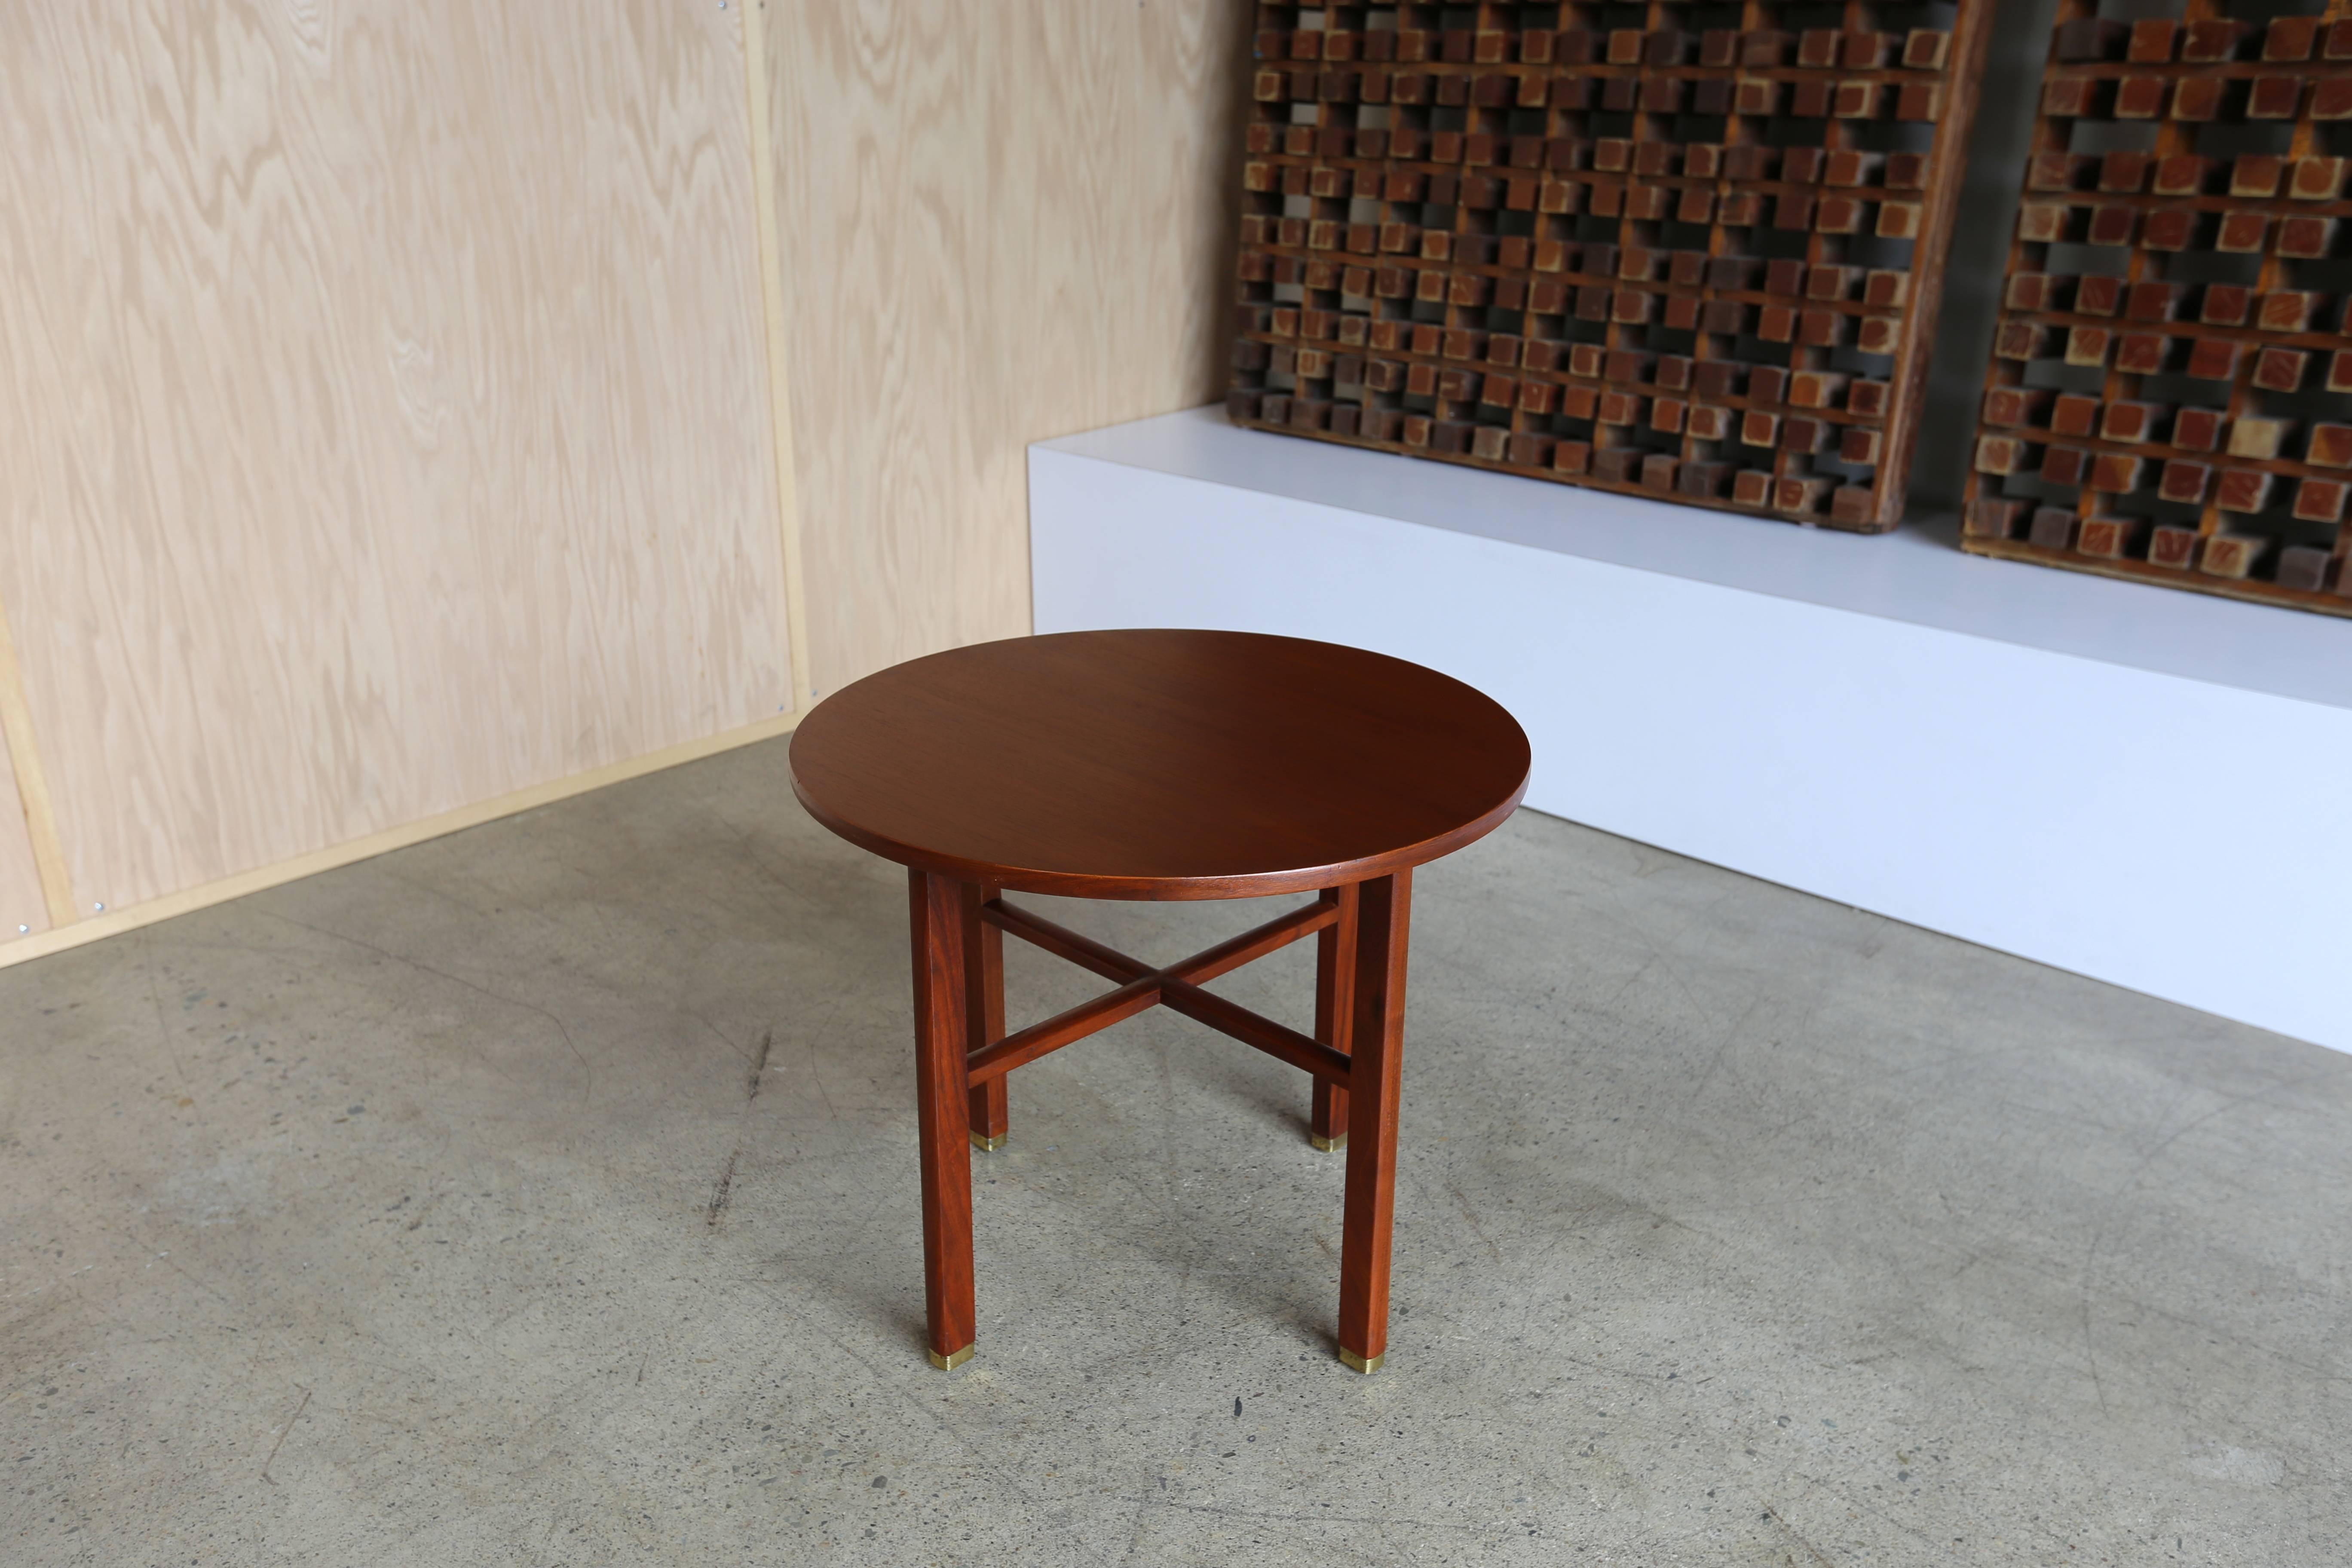 Round occasional table by Edward Wormley for Dunbar.